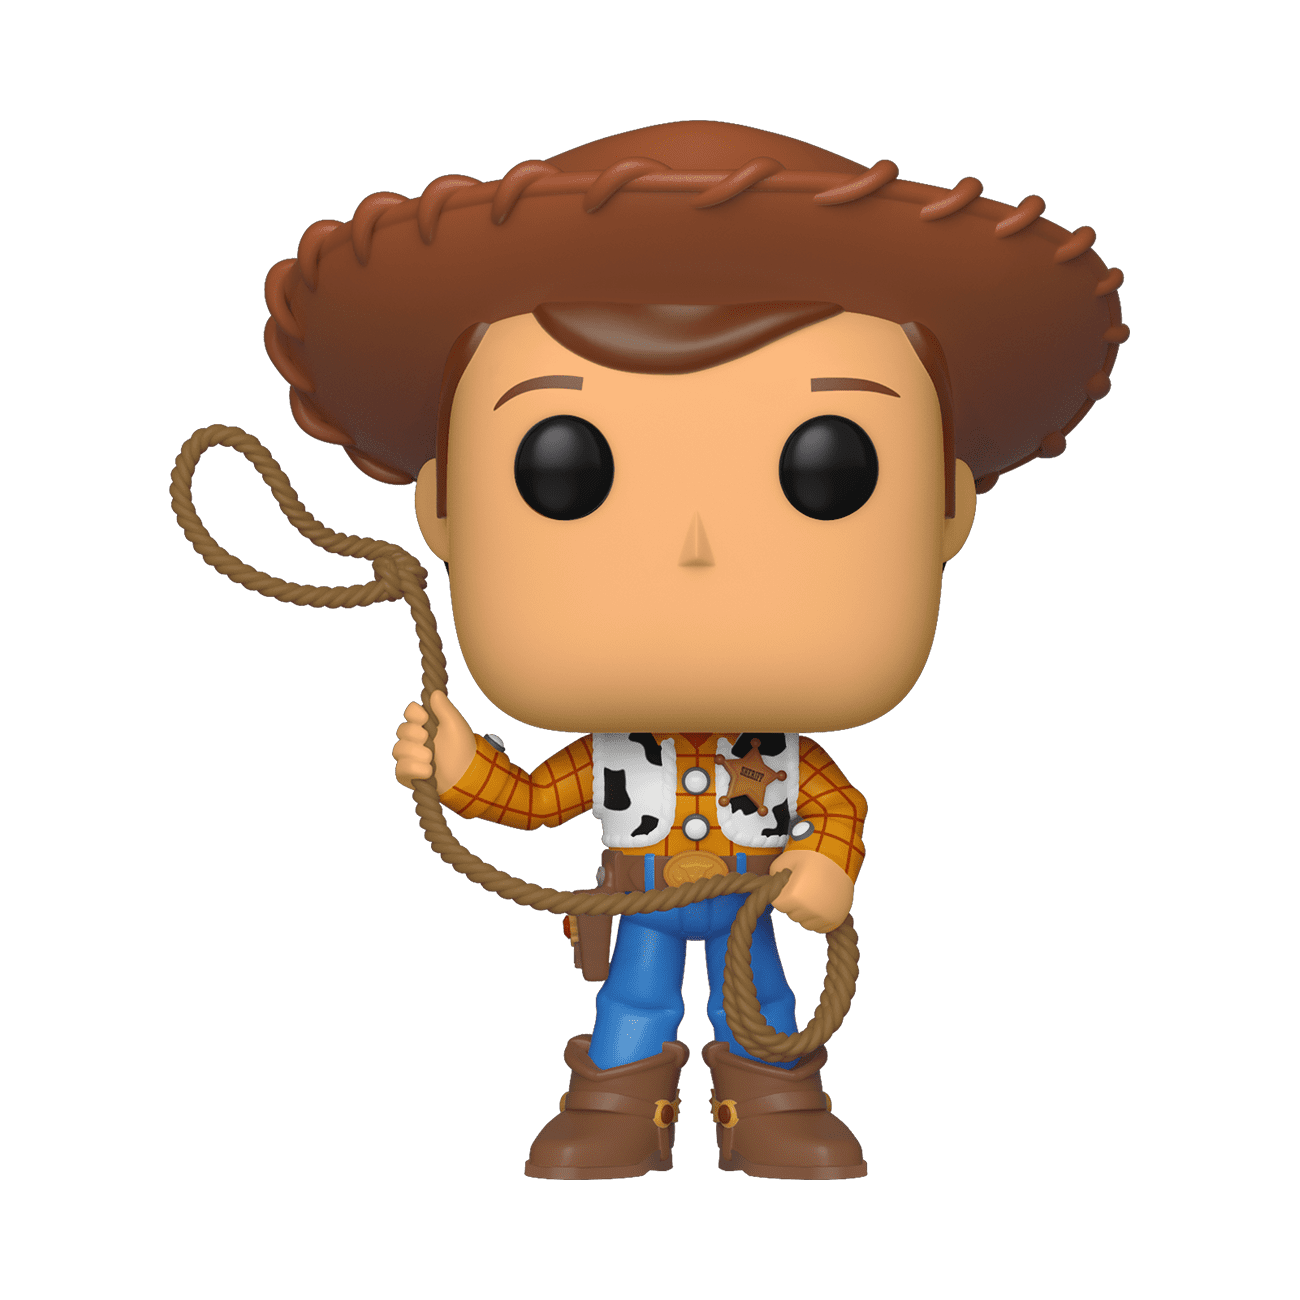 Funko Pop Disney: Toy Story Woody New Pose Action Figure, Brown